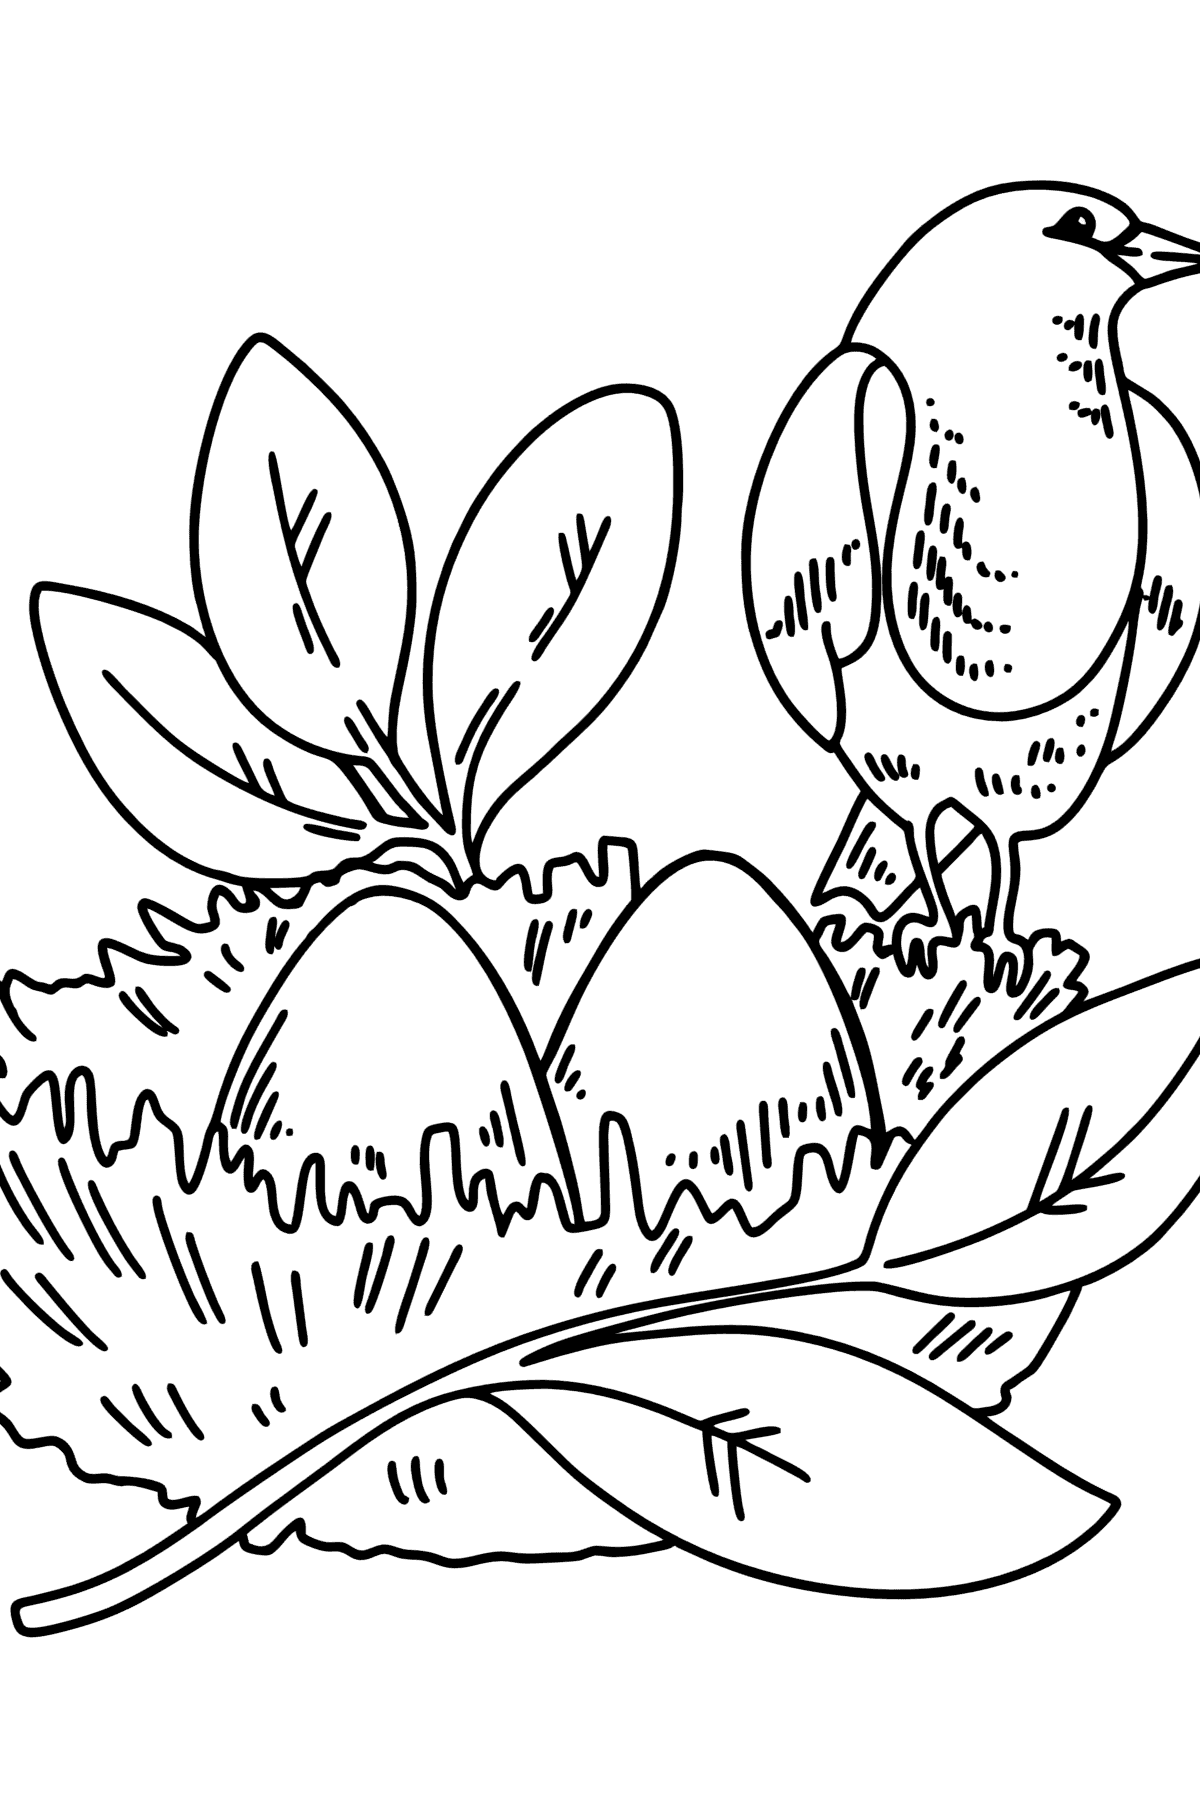 Coloring page - Thrush Nest - Coloring Pages for Kids